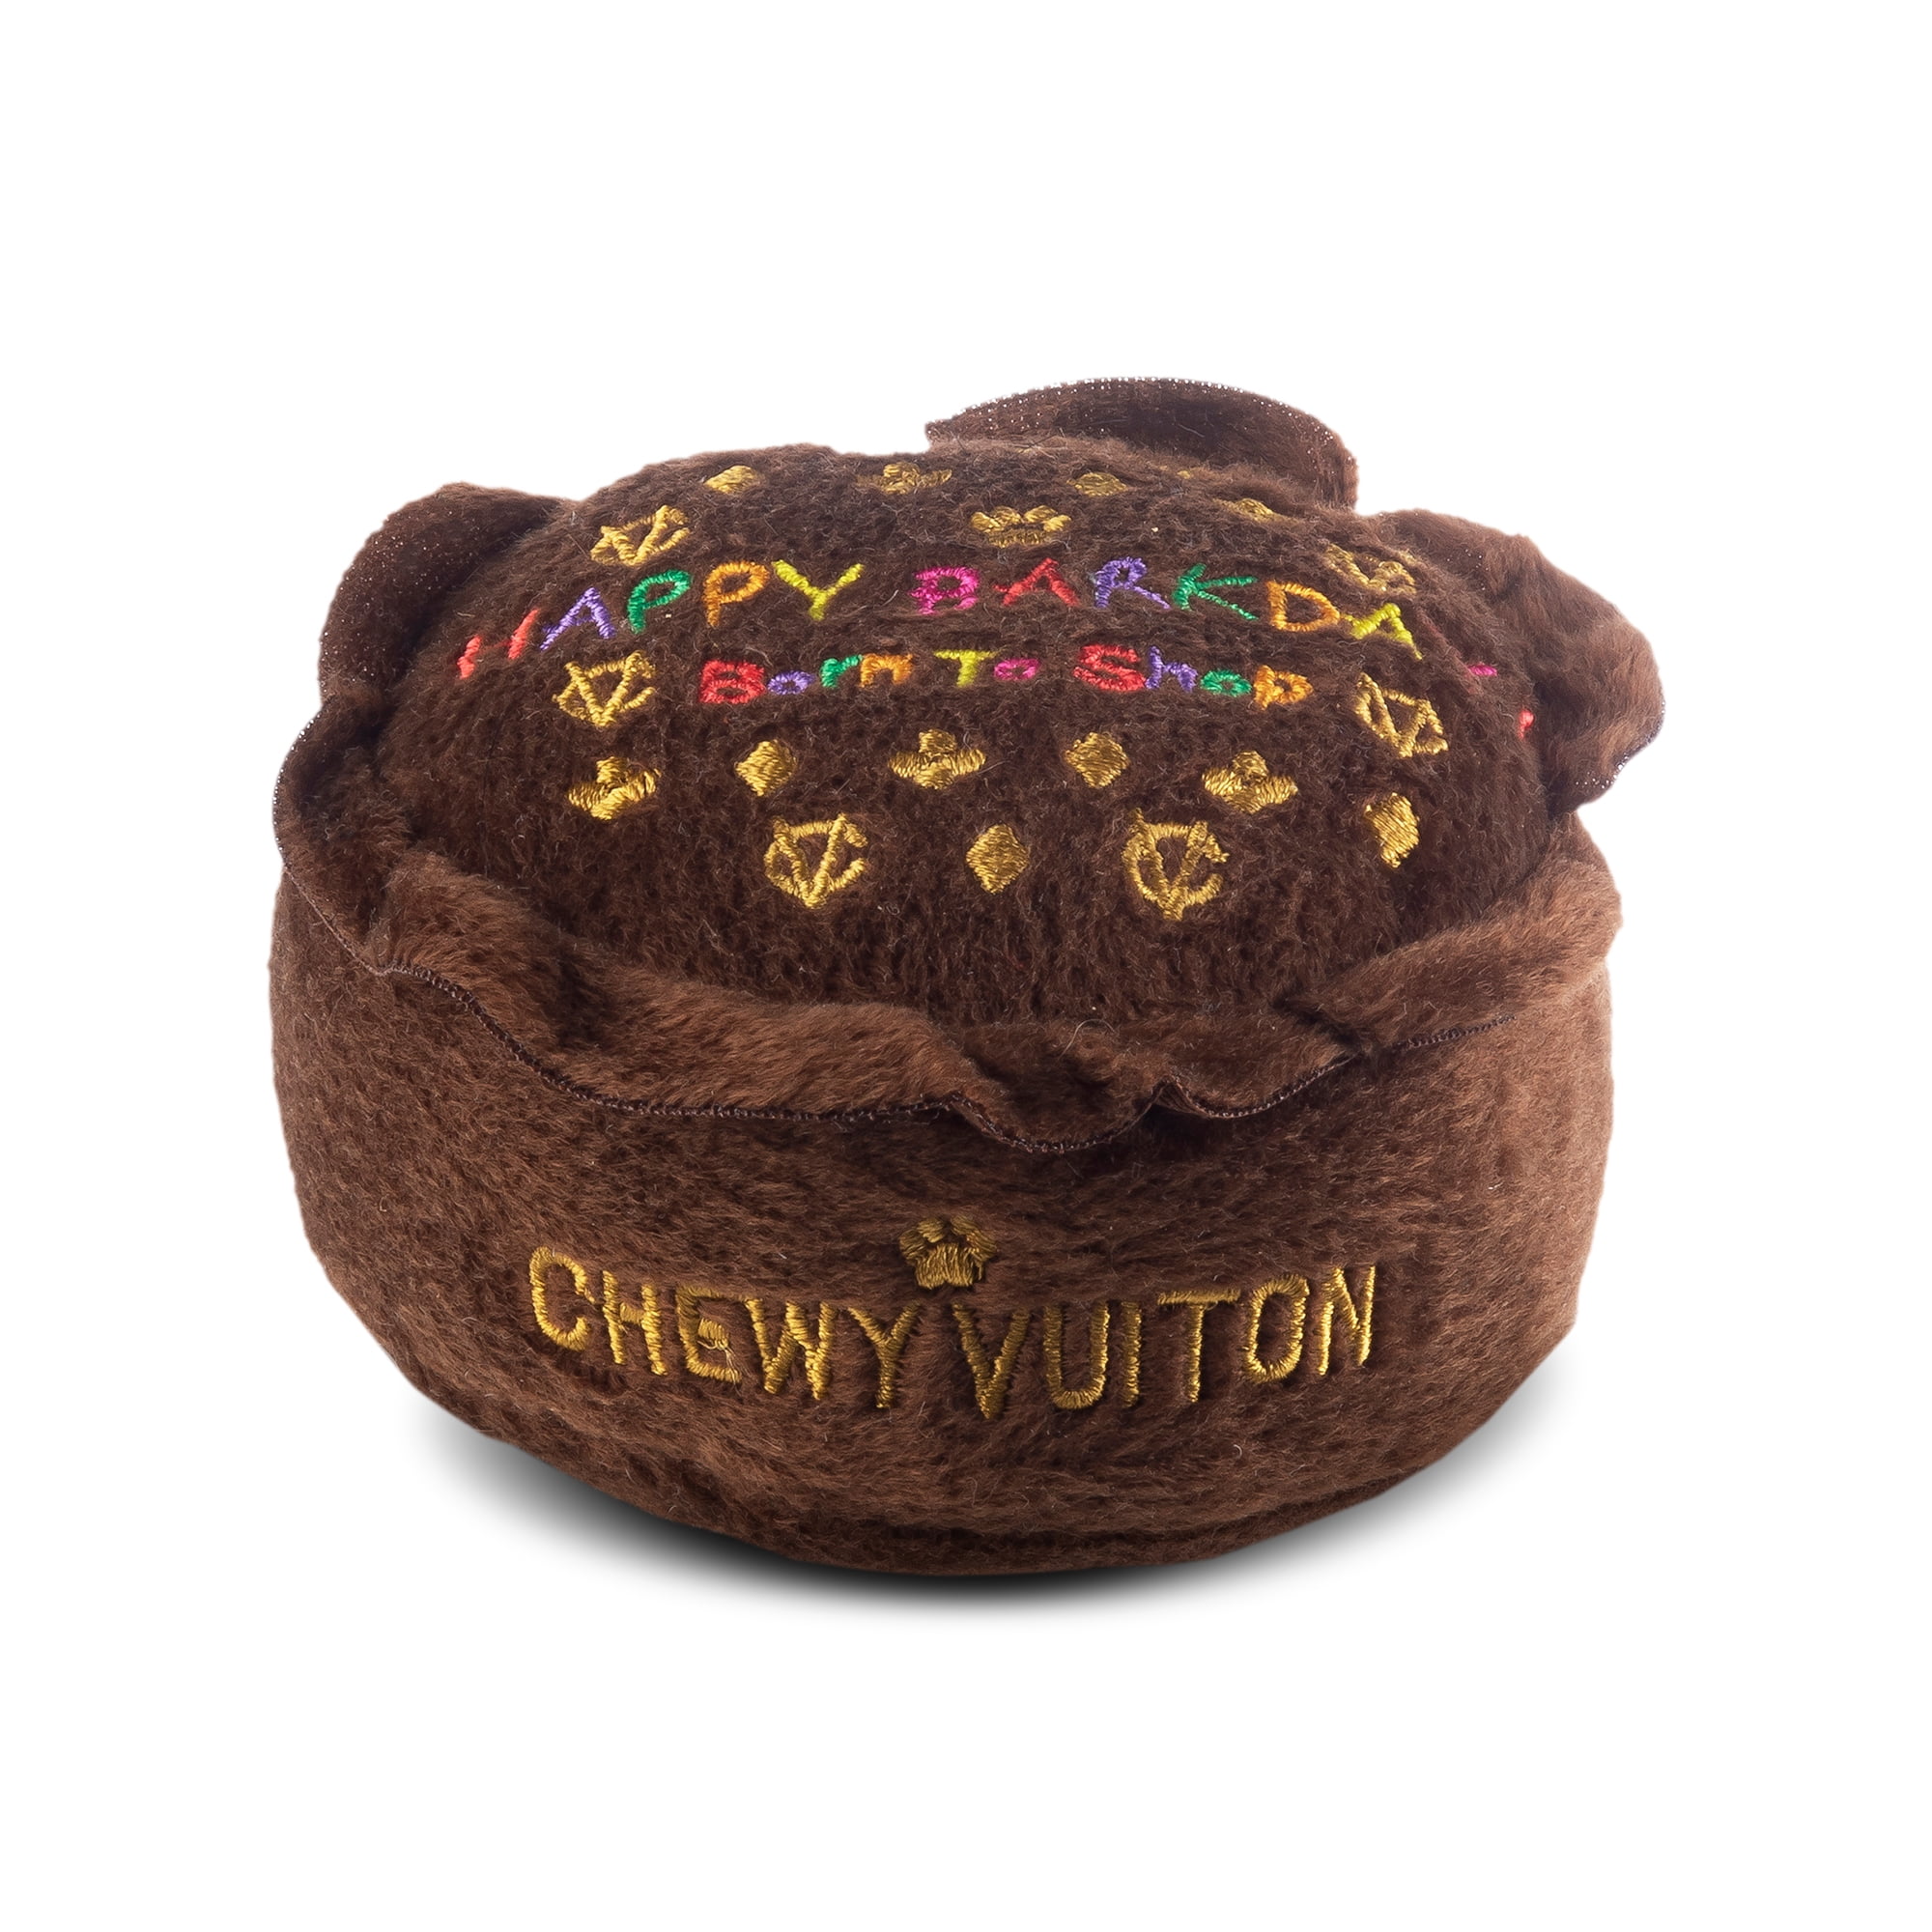 Discount in Large Brown Chewy Vuiton Toy - Toys - Designer